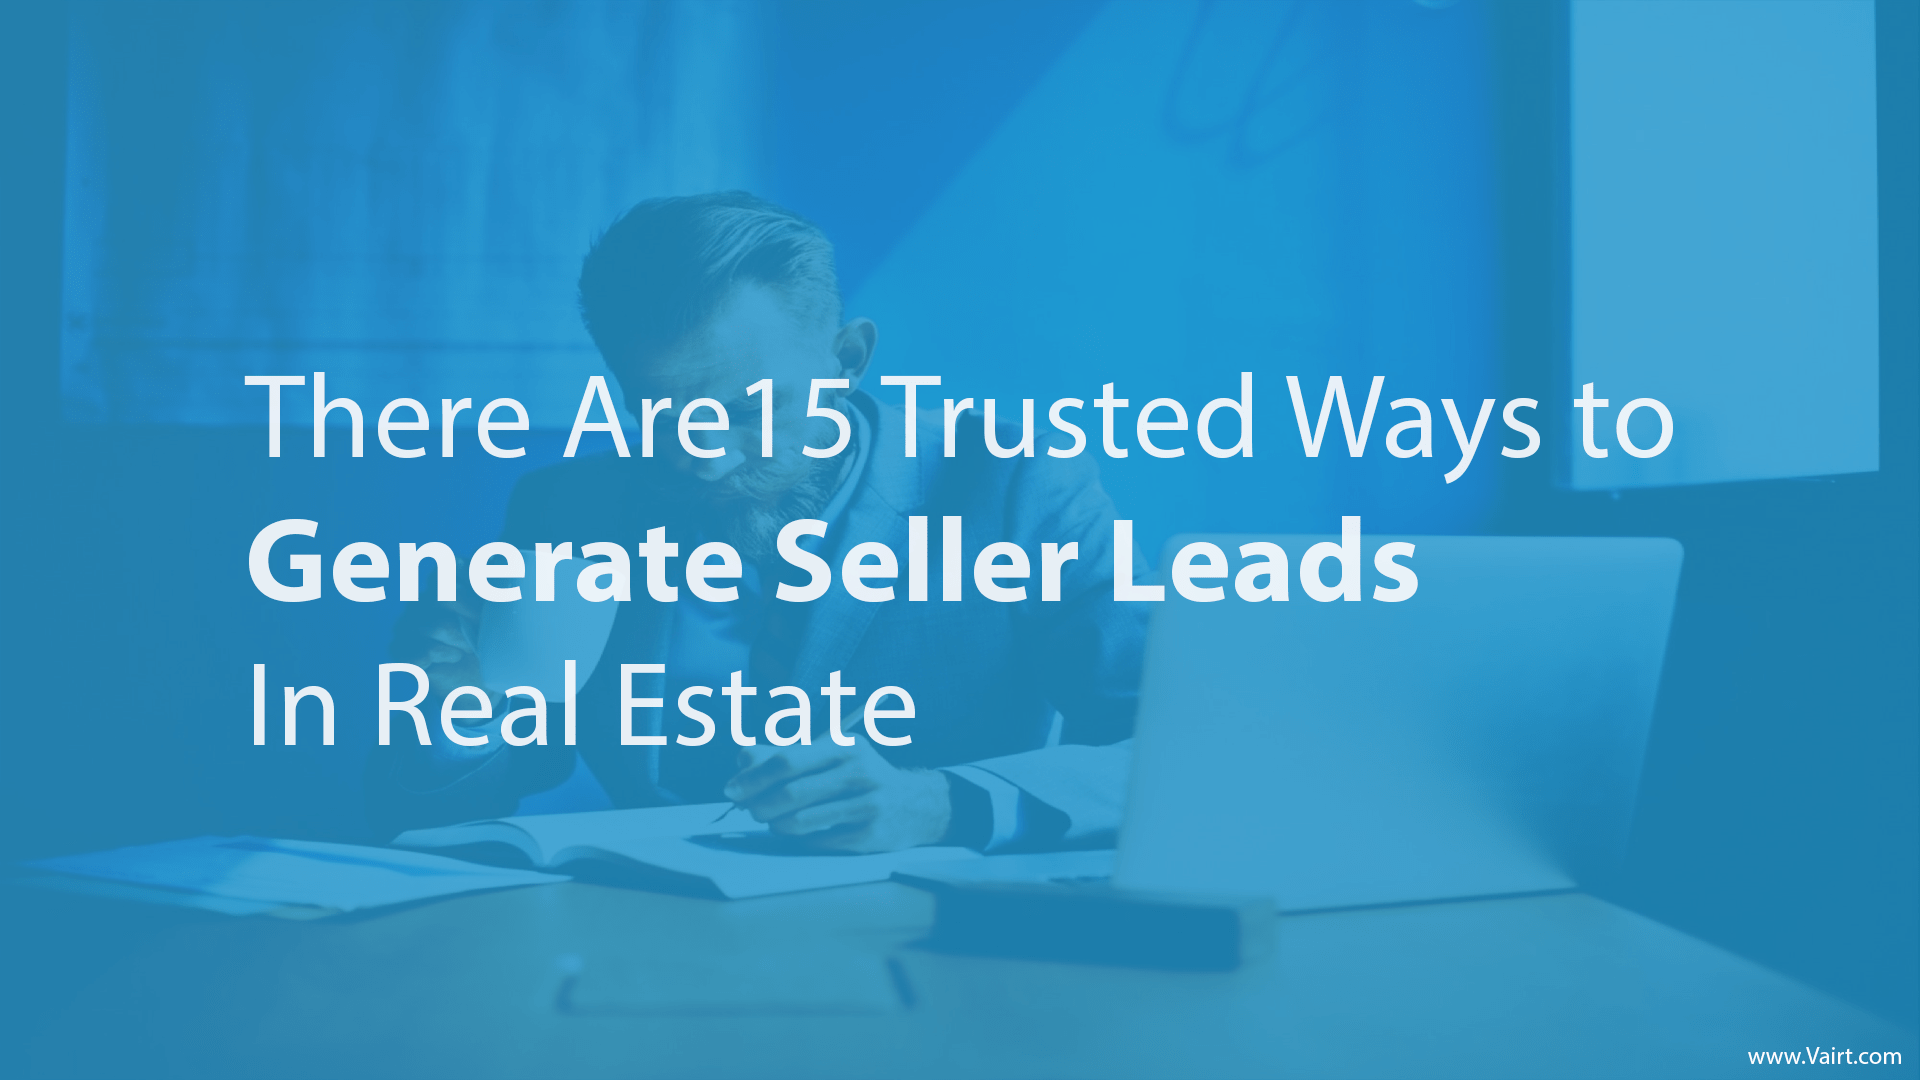 Trusted Ways to Generate Seller Leads in Real Estate